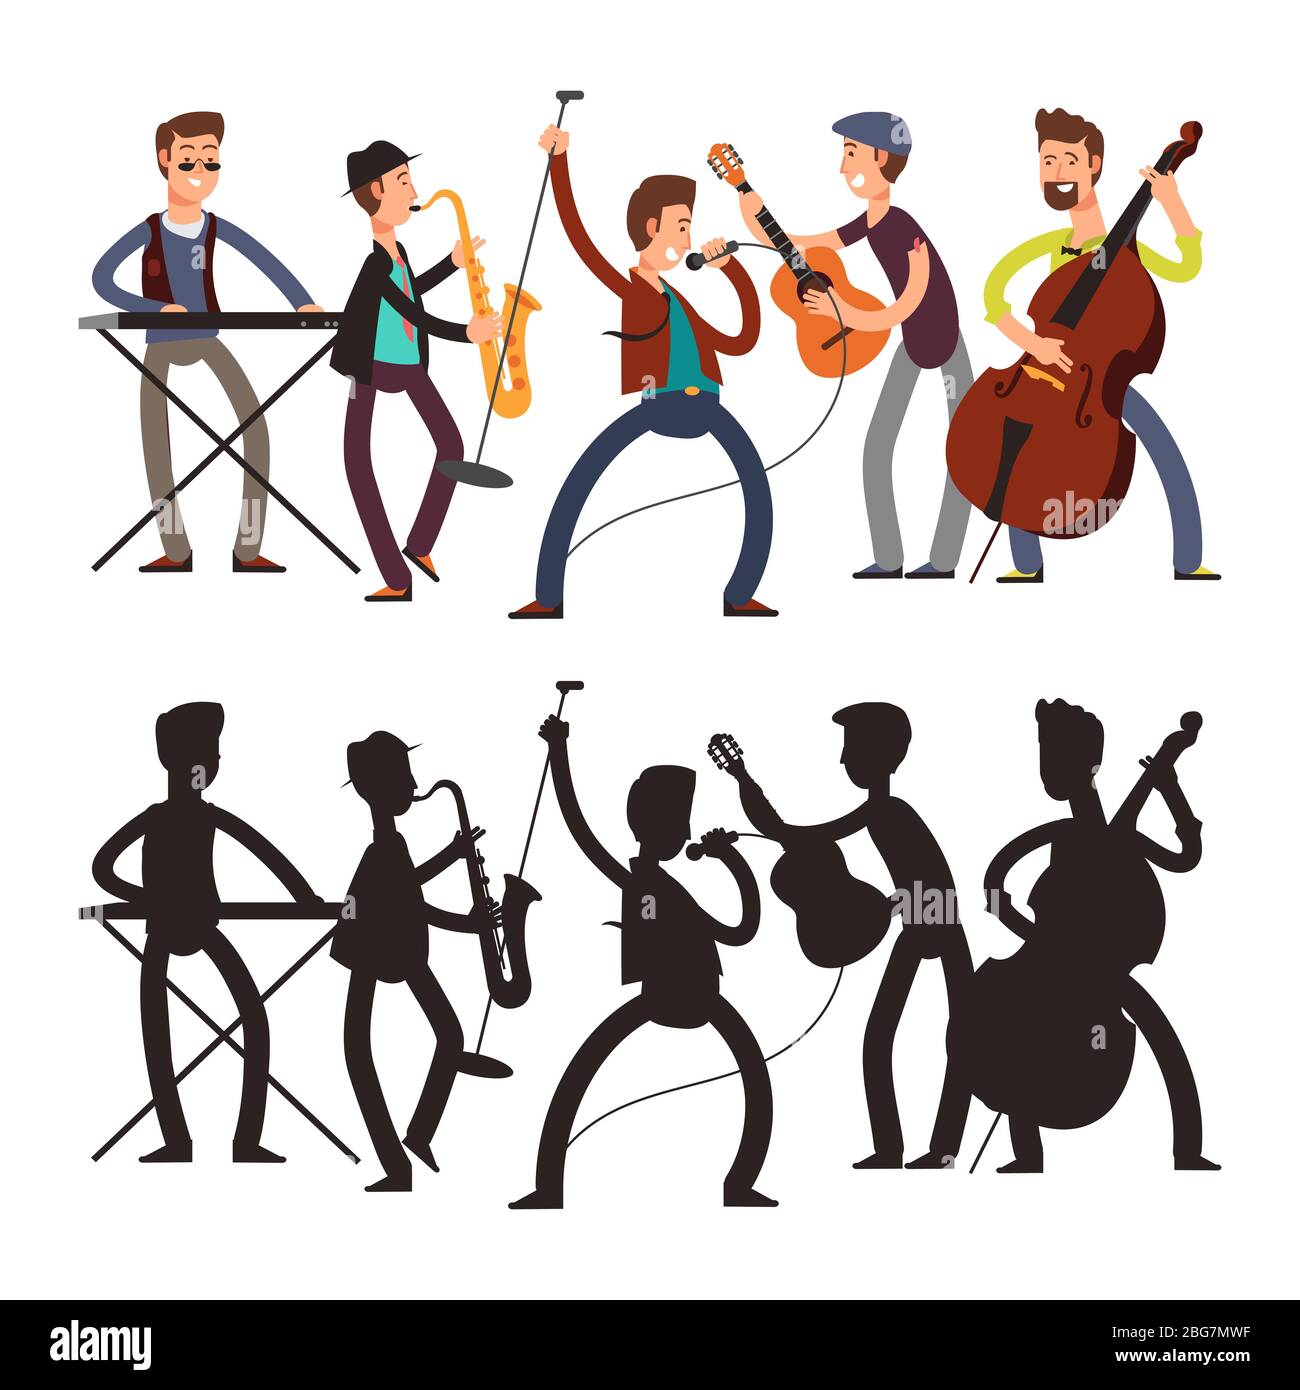 Male pop music band playing music. Vector illustration of cartoon character and silhouette musicians isolated on white background Stock Vector